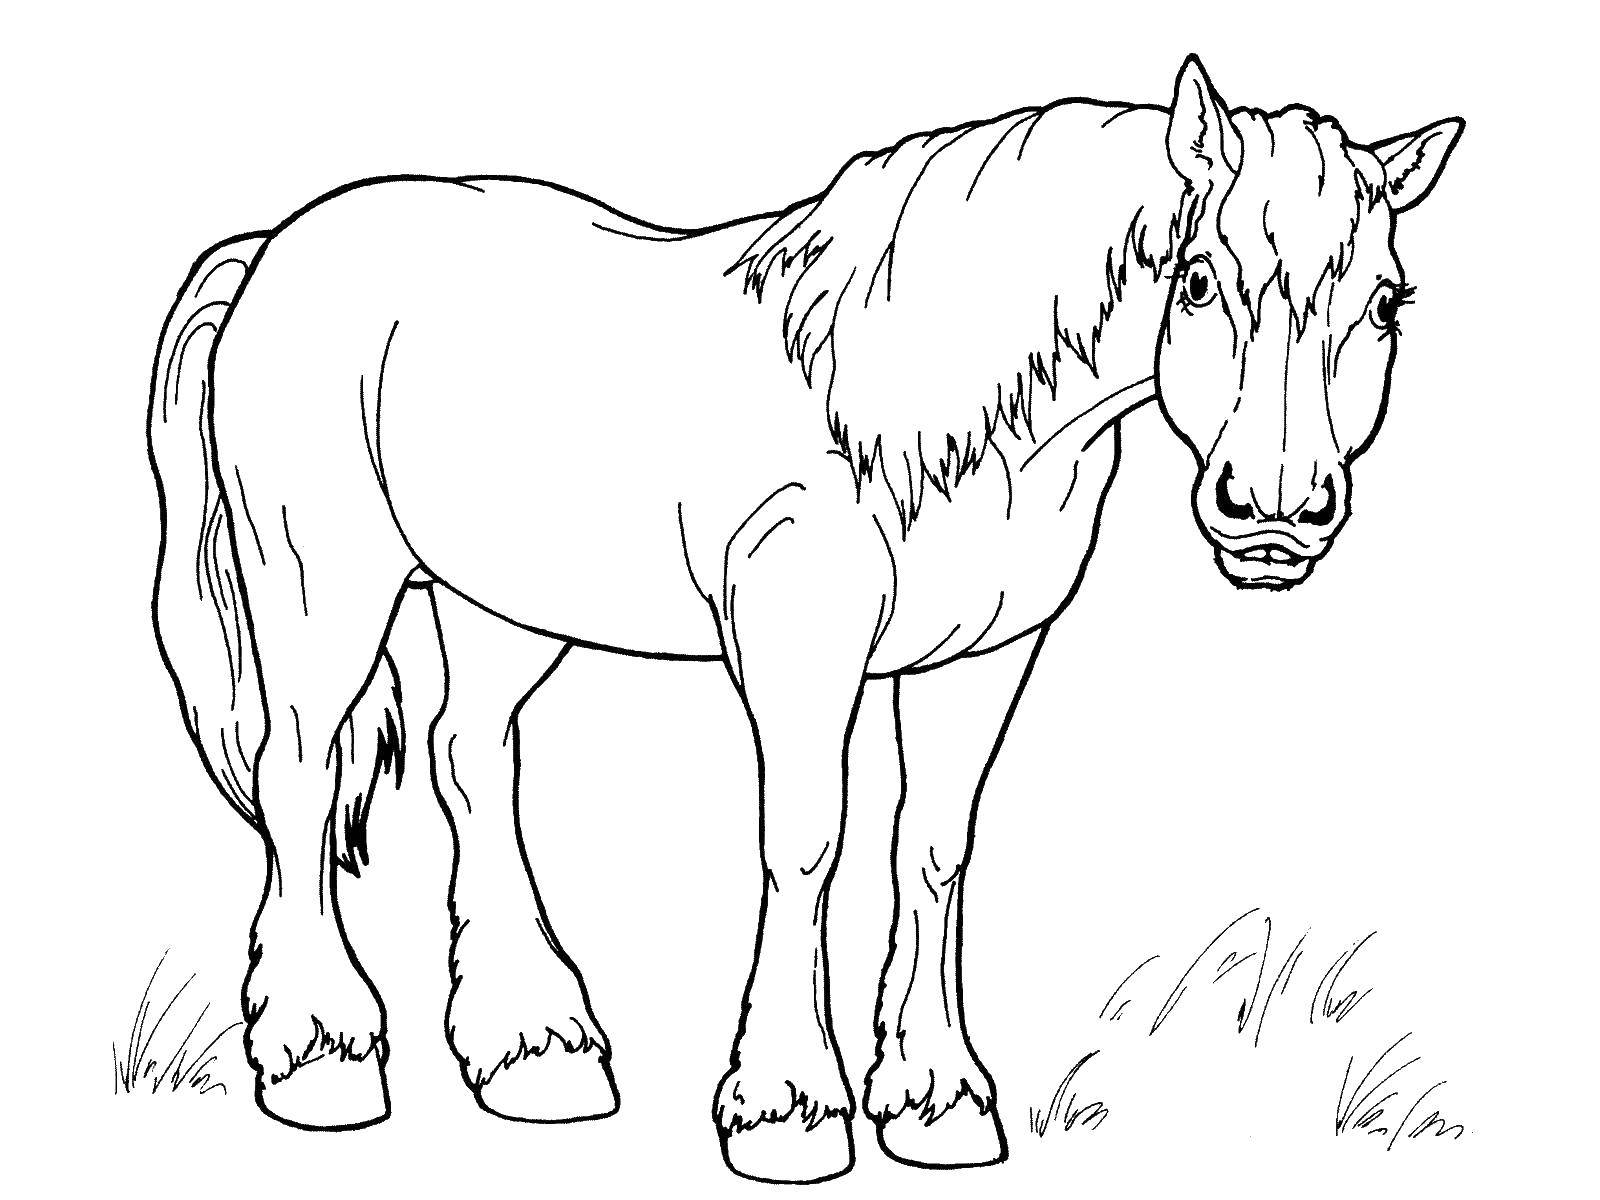 Coloring A clever horse. Category Pets allowed. Tags:  Animals, horse.